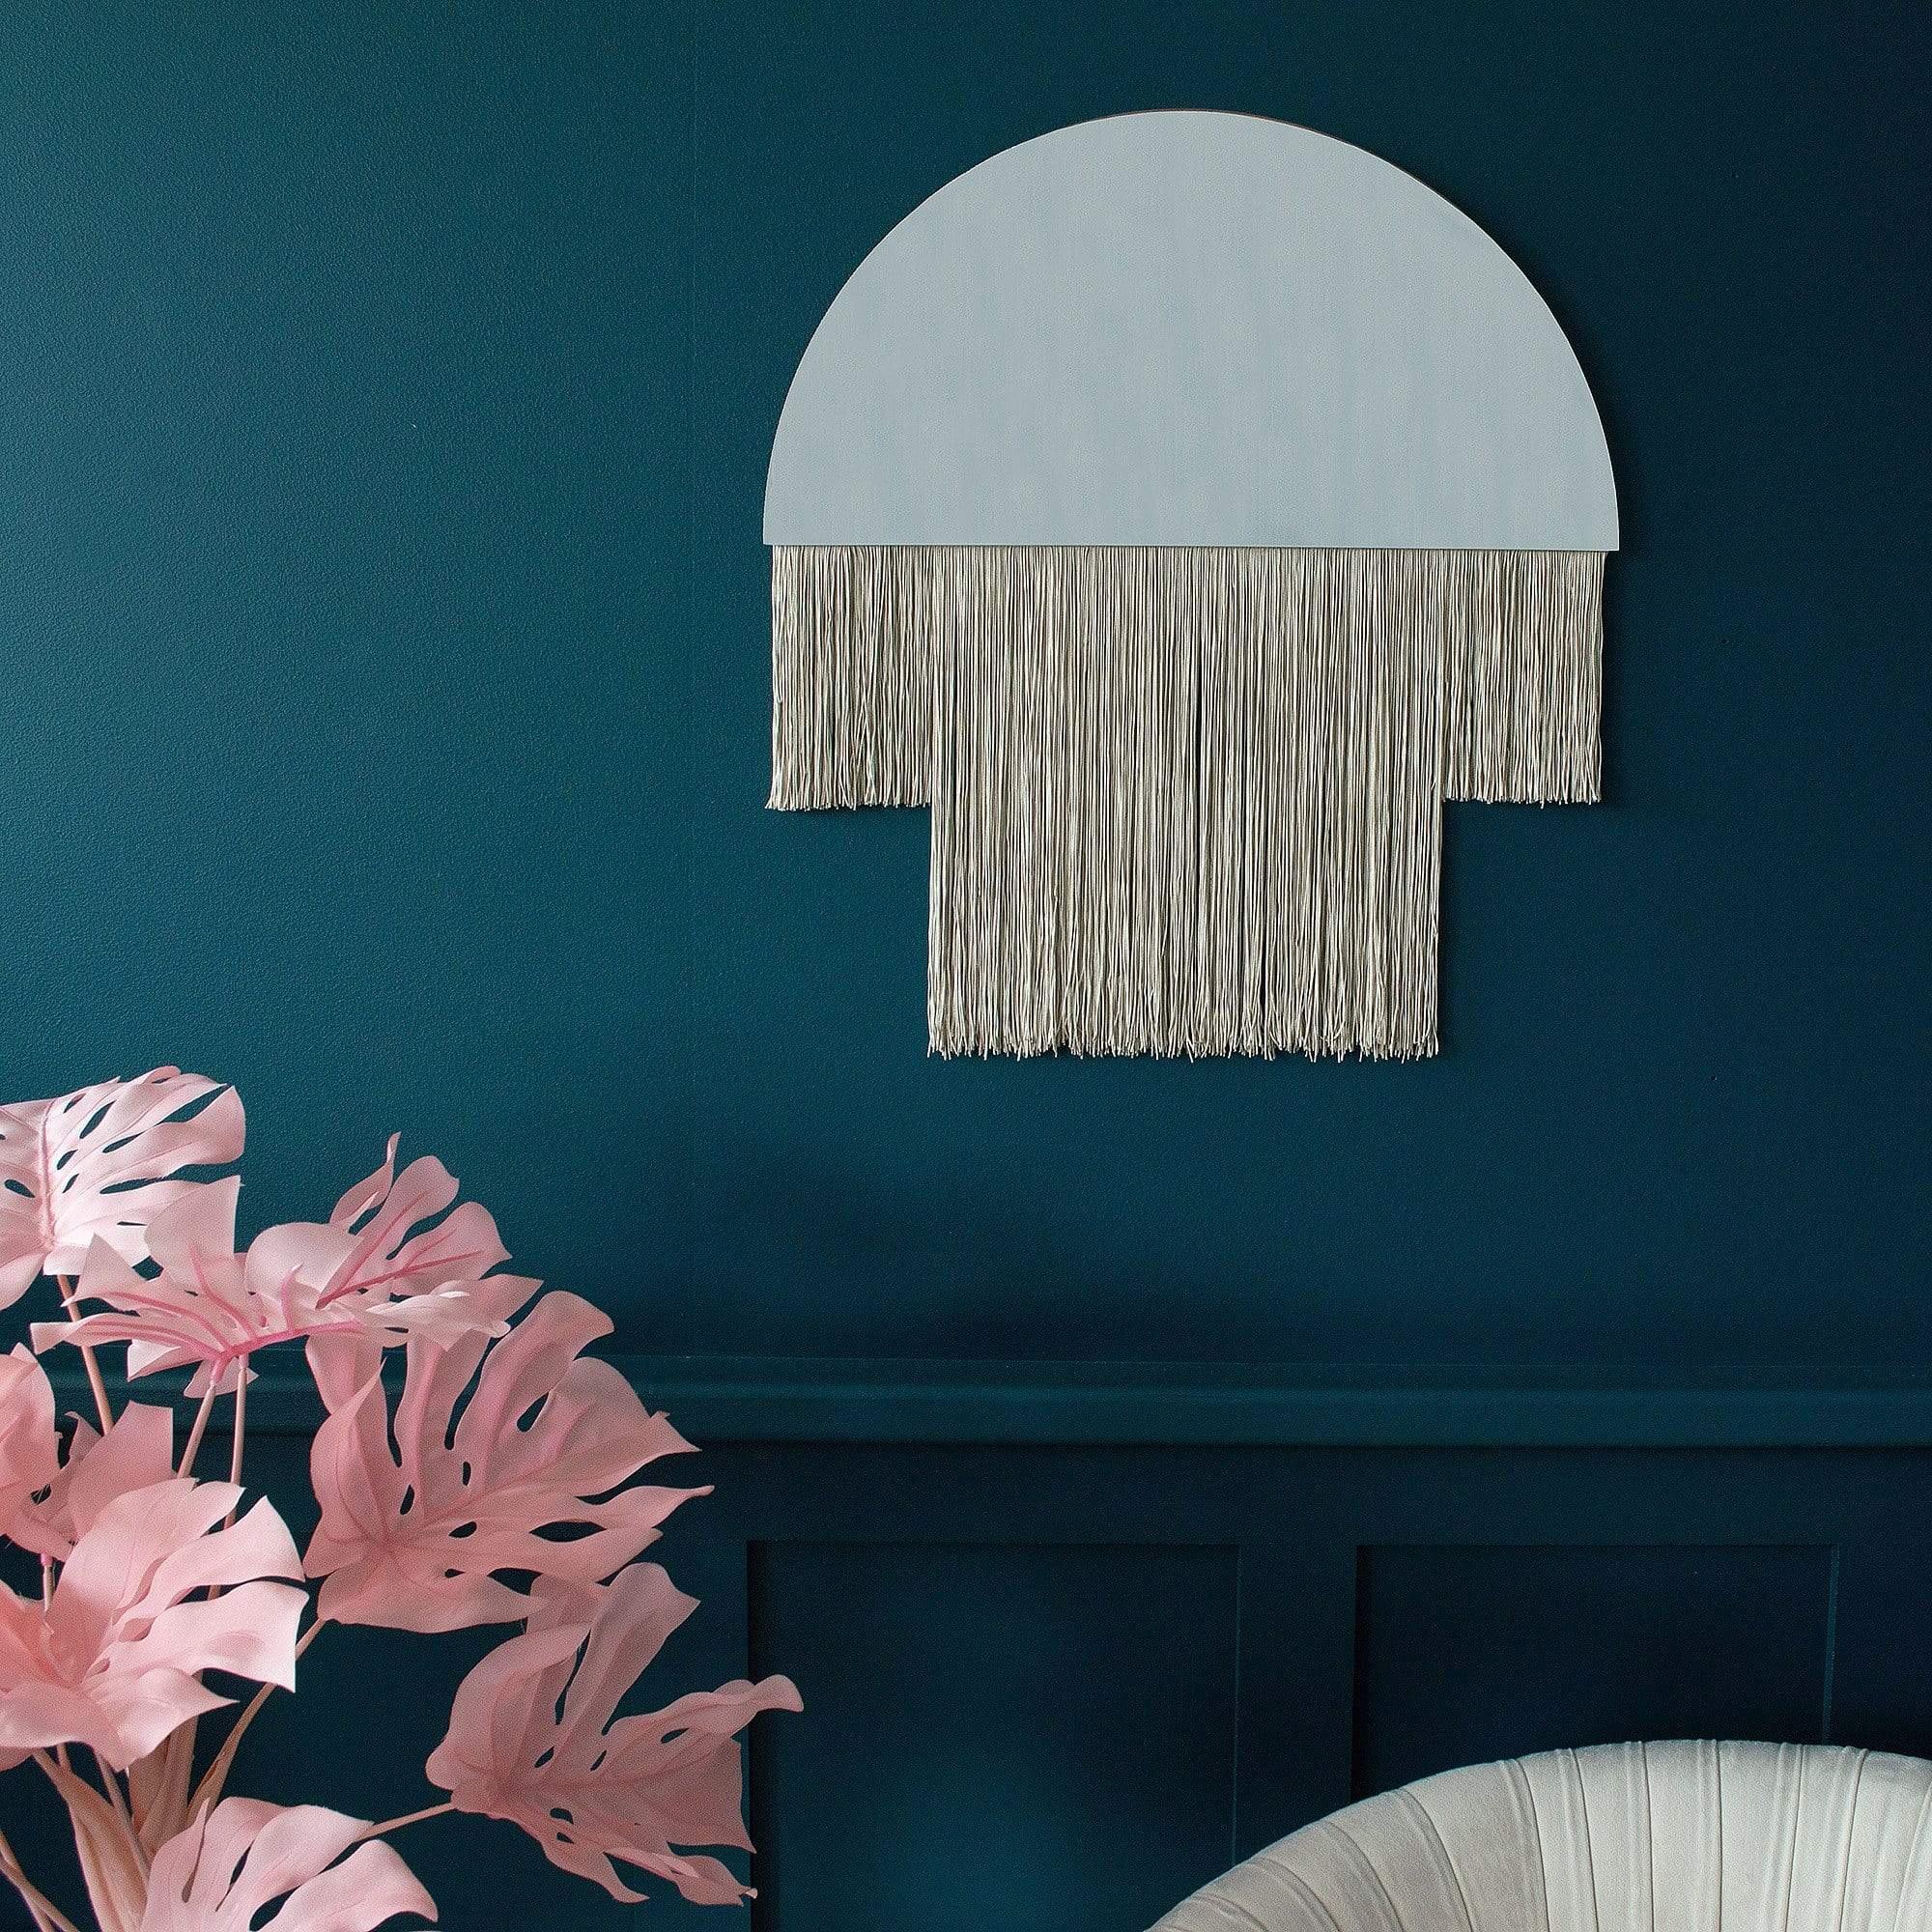 Demi-lune Mirror with Fringing